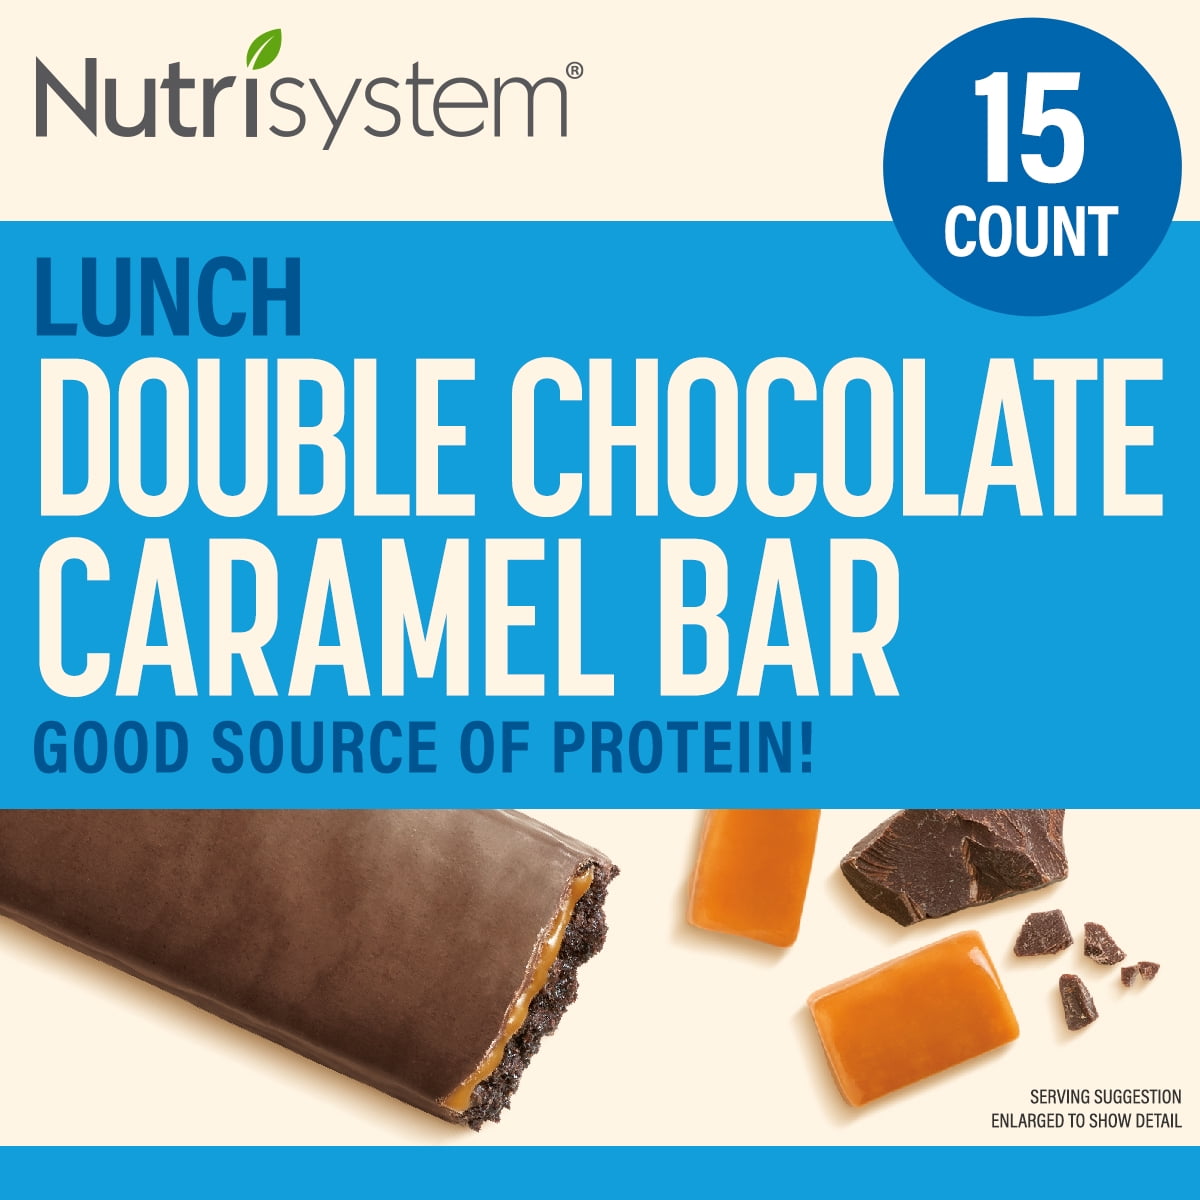 Nutrisystem® Double Chocolate Caramel Bar Pack, 15 Count - Ready to Eat Lunch Bars Made to Support Healthy Weight Loss